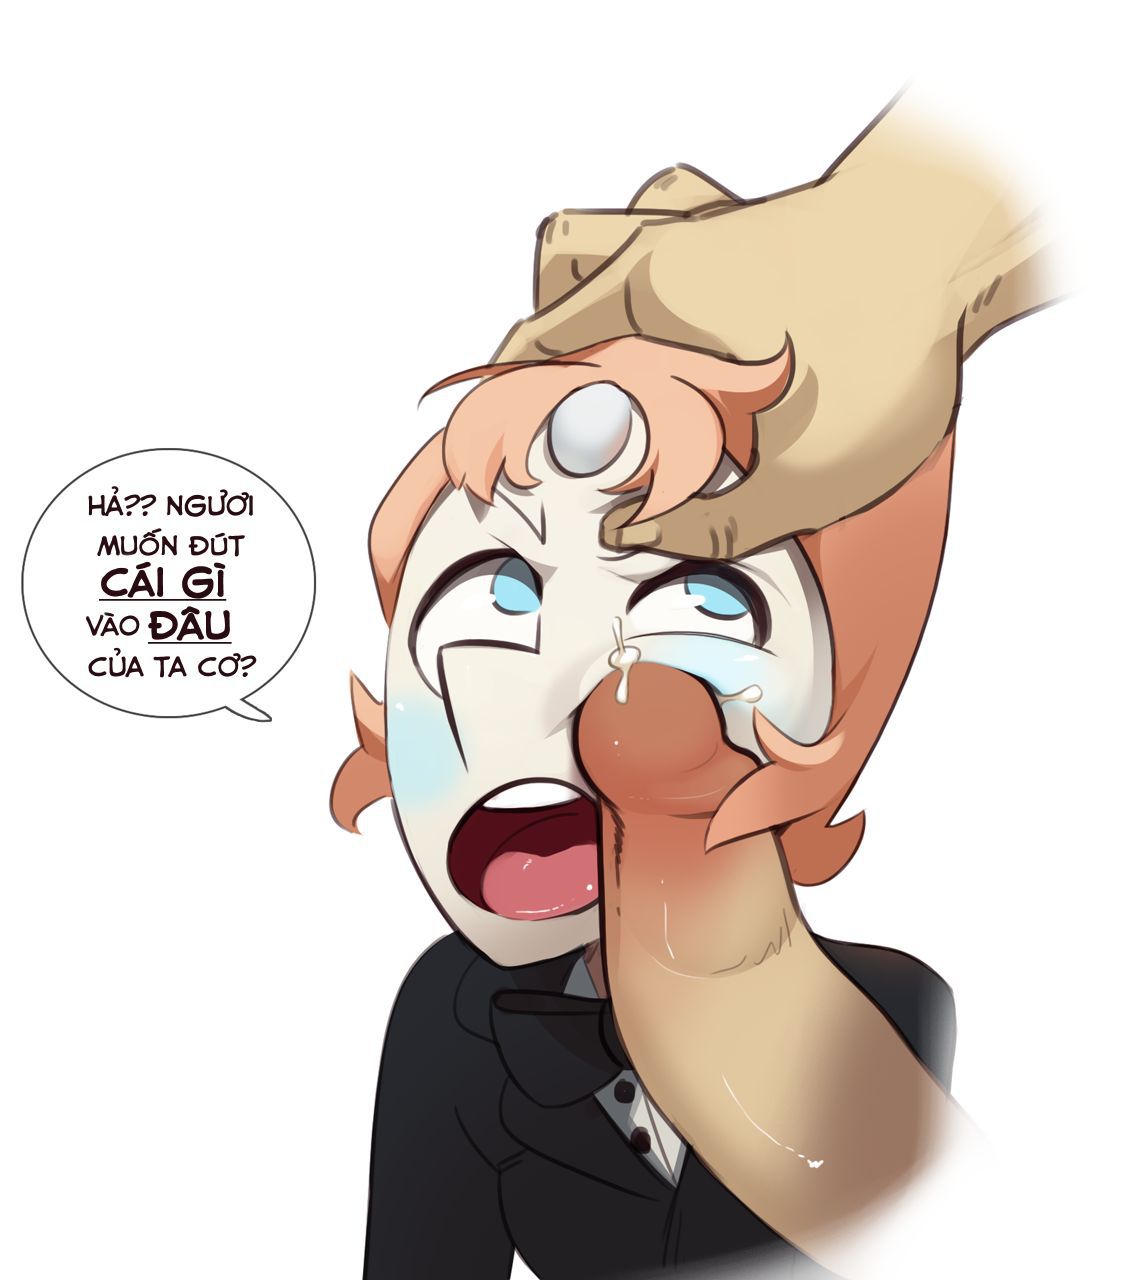 [Polyle] Commission - Pearl 10 hour (Steven Universe) [Vietnamese Tiếng Việt] [Yung Child Support (Dreamy)] 5